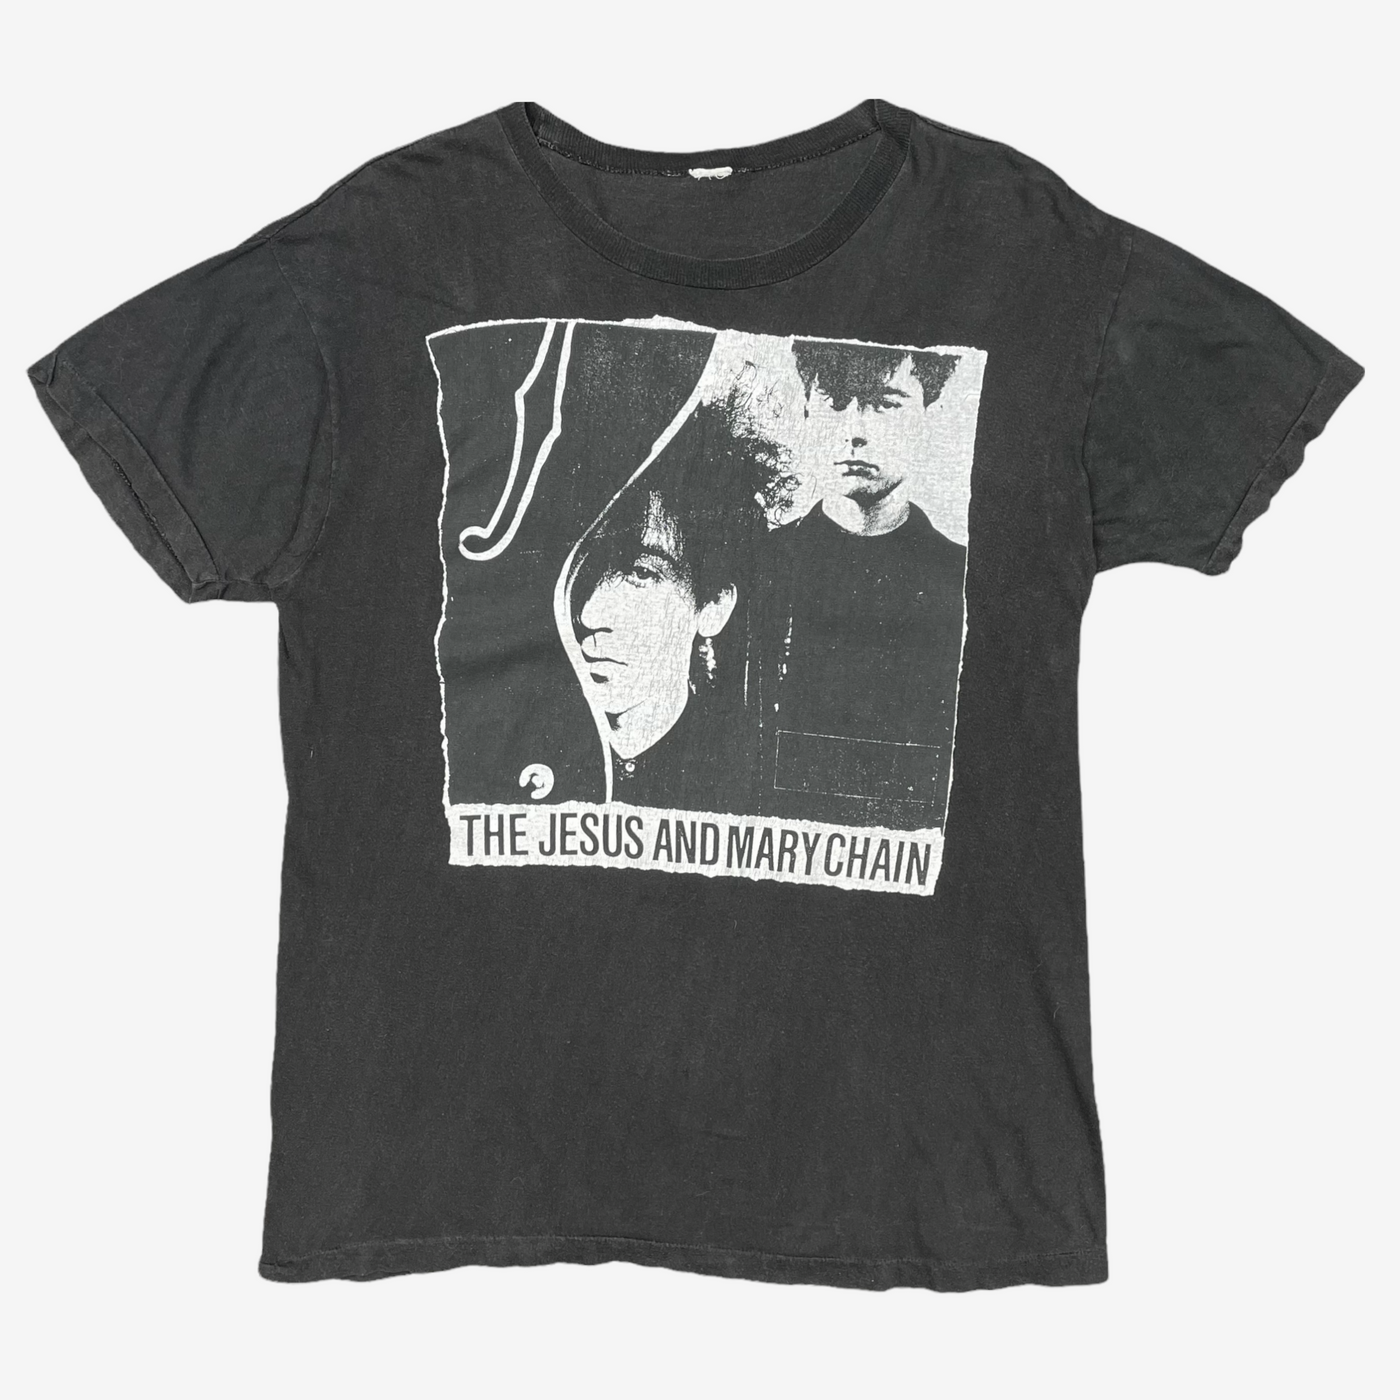 LATE 80s JESUS AND MARY CHAIN T-SHIRT